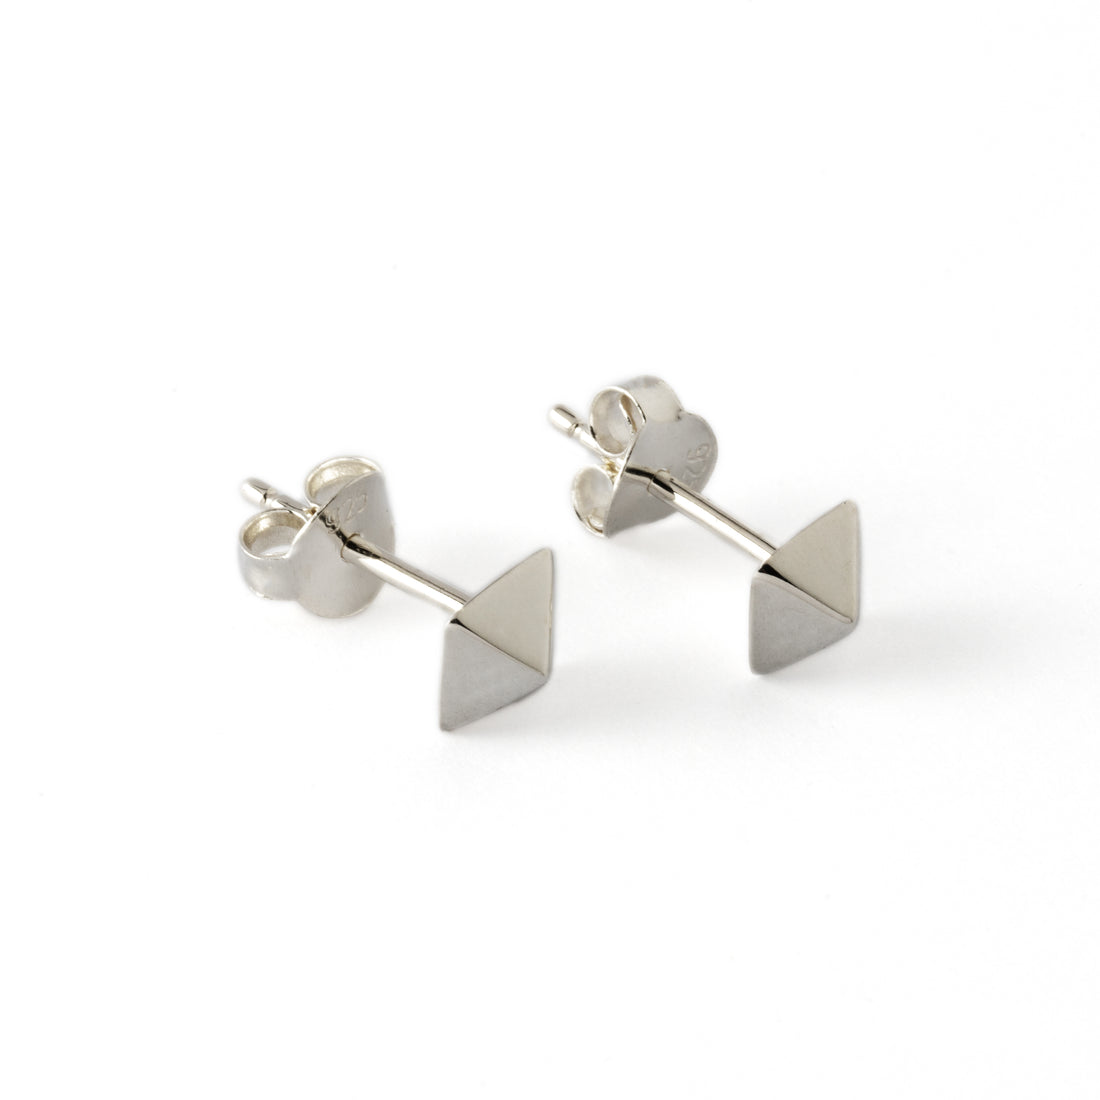 pair of Silver pyramid ear studs left side view